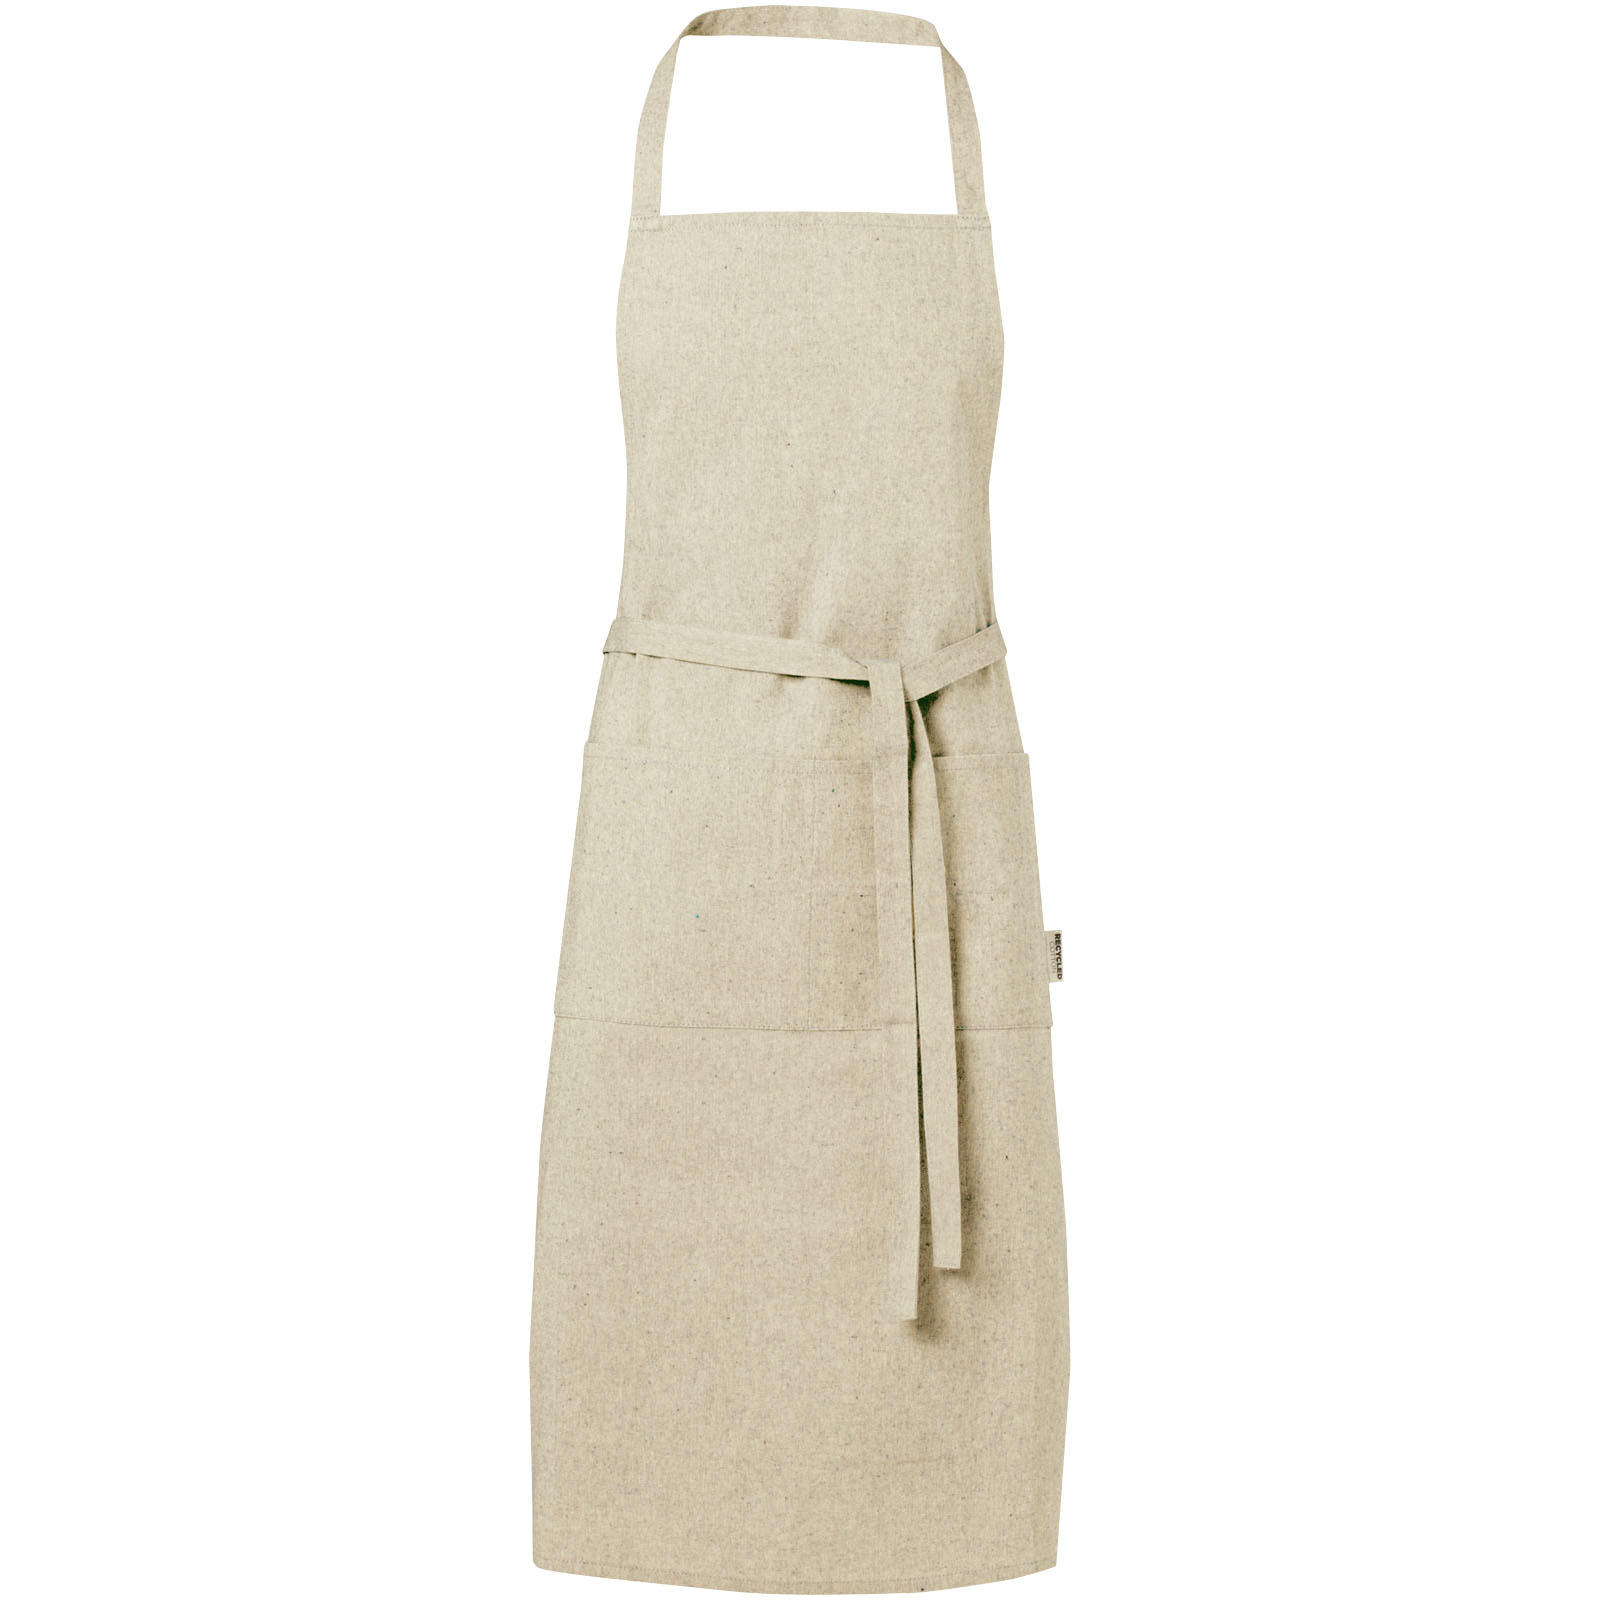 Home & Kitchen - Pheebs 200 g/m² recycled cotton apron